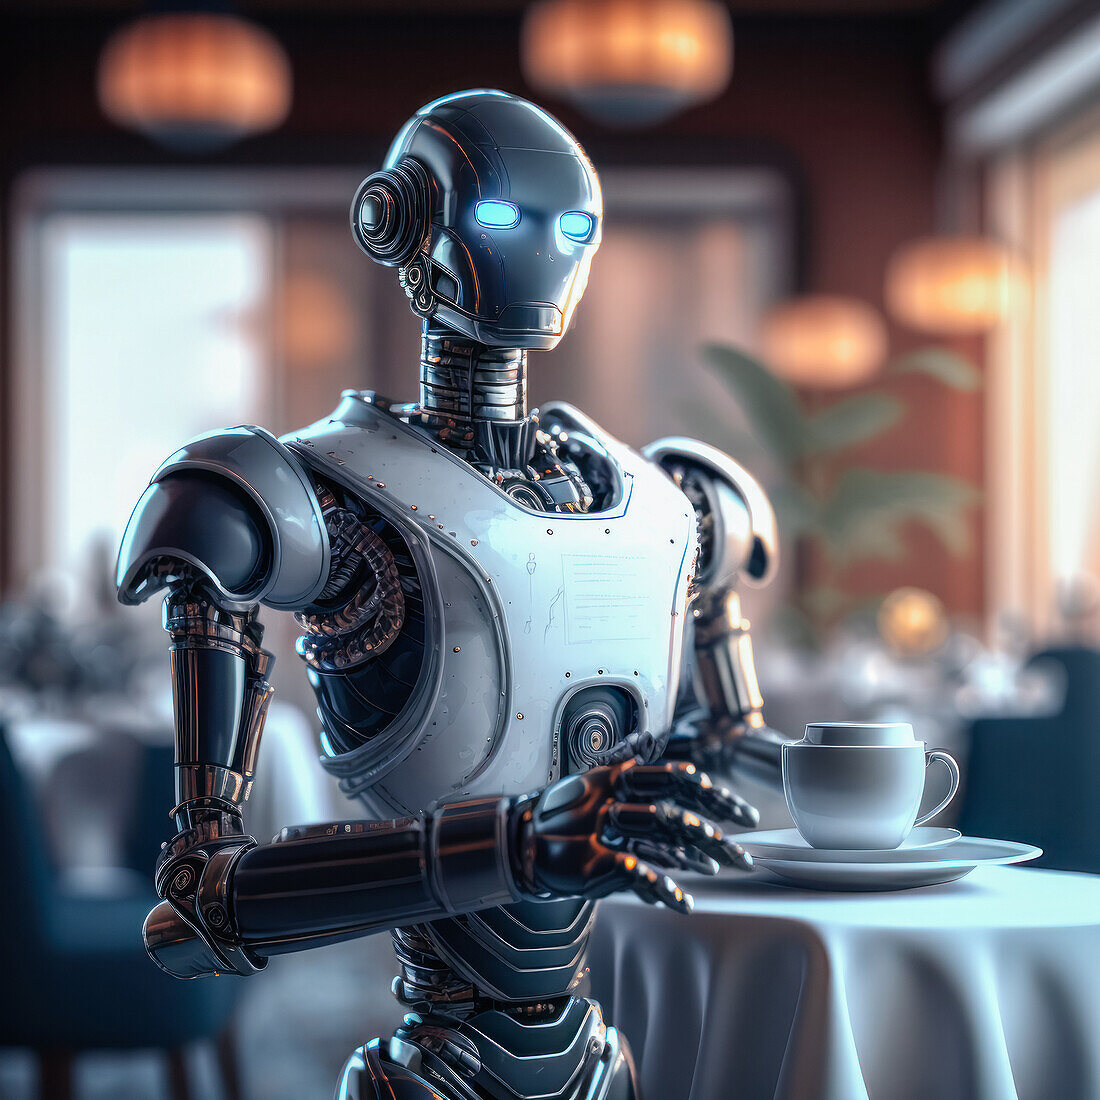 Metal futuristic robot with illuminated lamps in eyes standing near table with tablecloth and cup of hot coffee in cafeteria